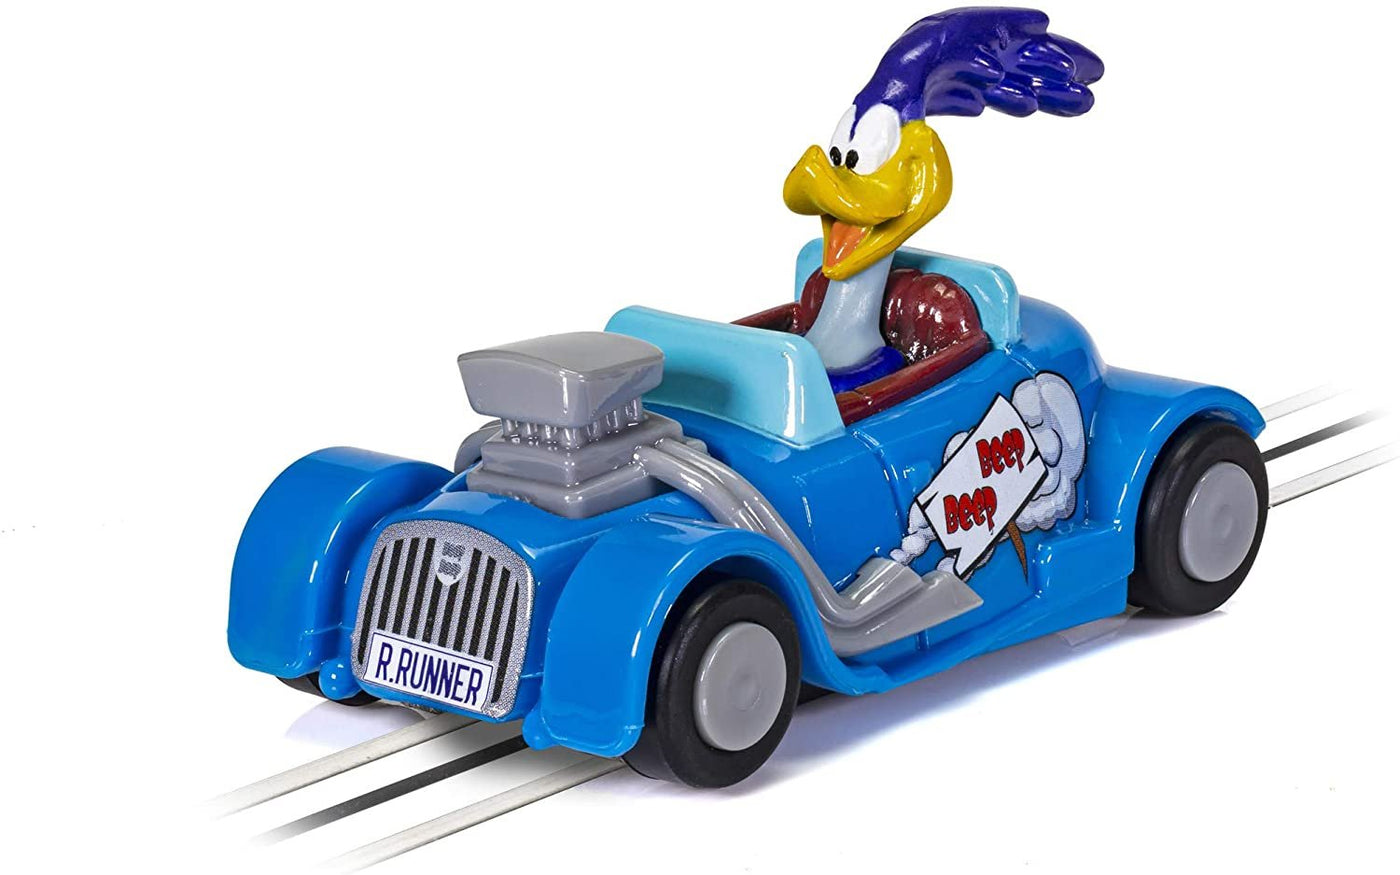 Micro My First Scalextric Looney Tunes Roadrunner Slot Race Car